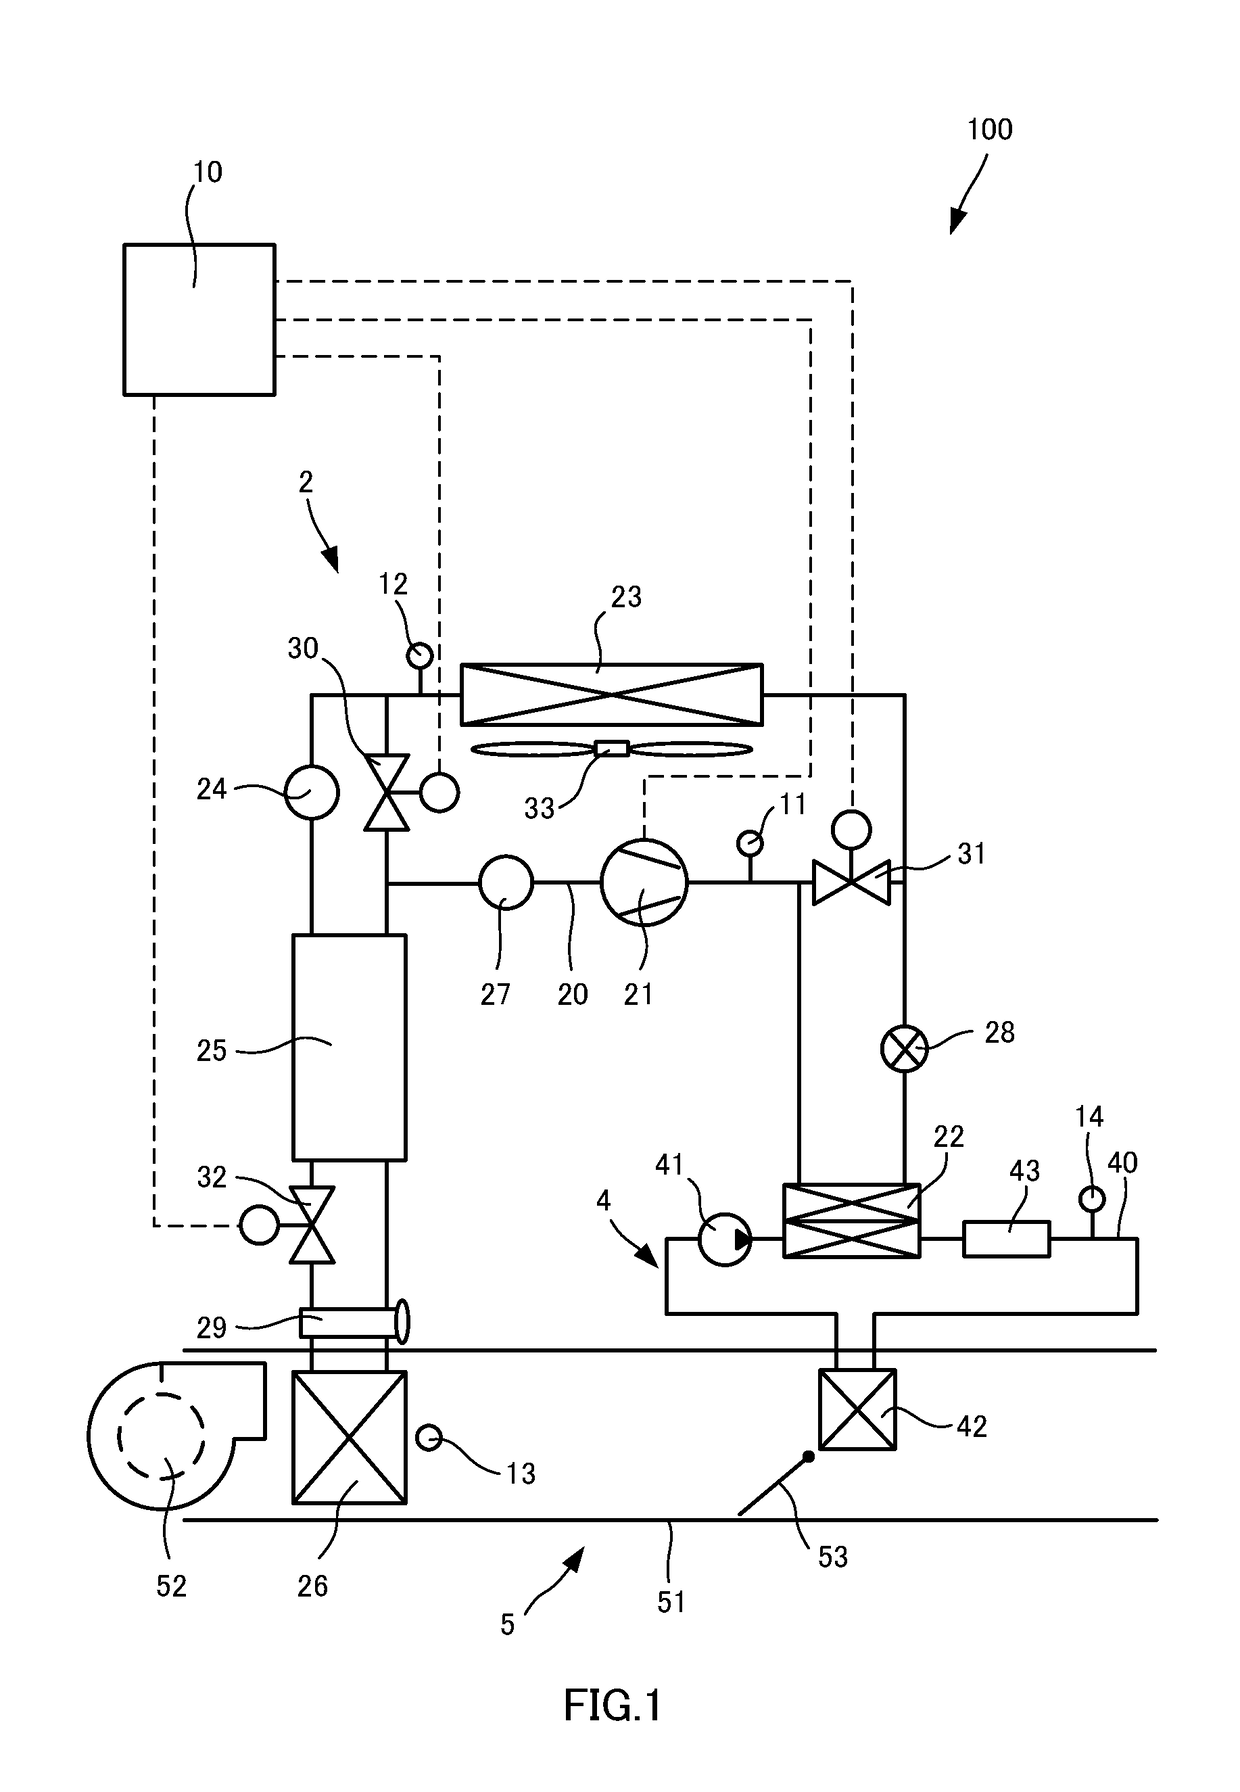 Air-conditioning device